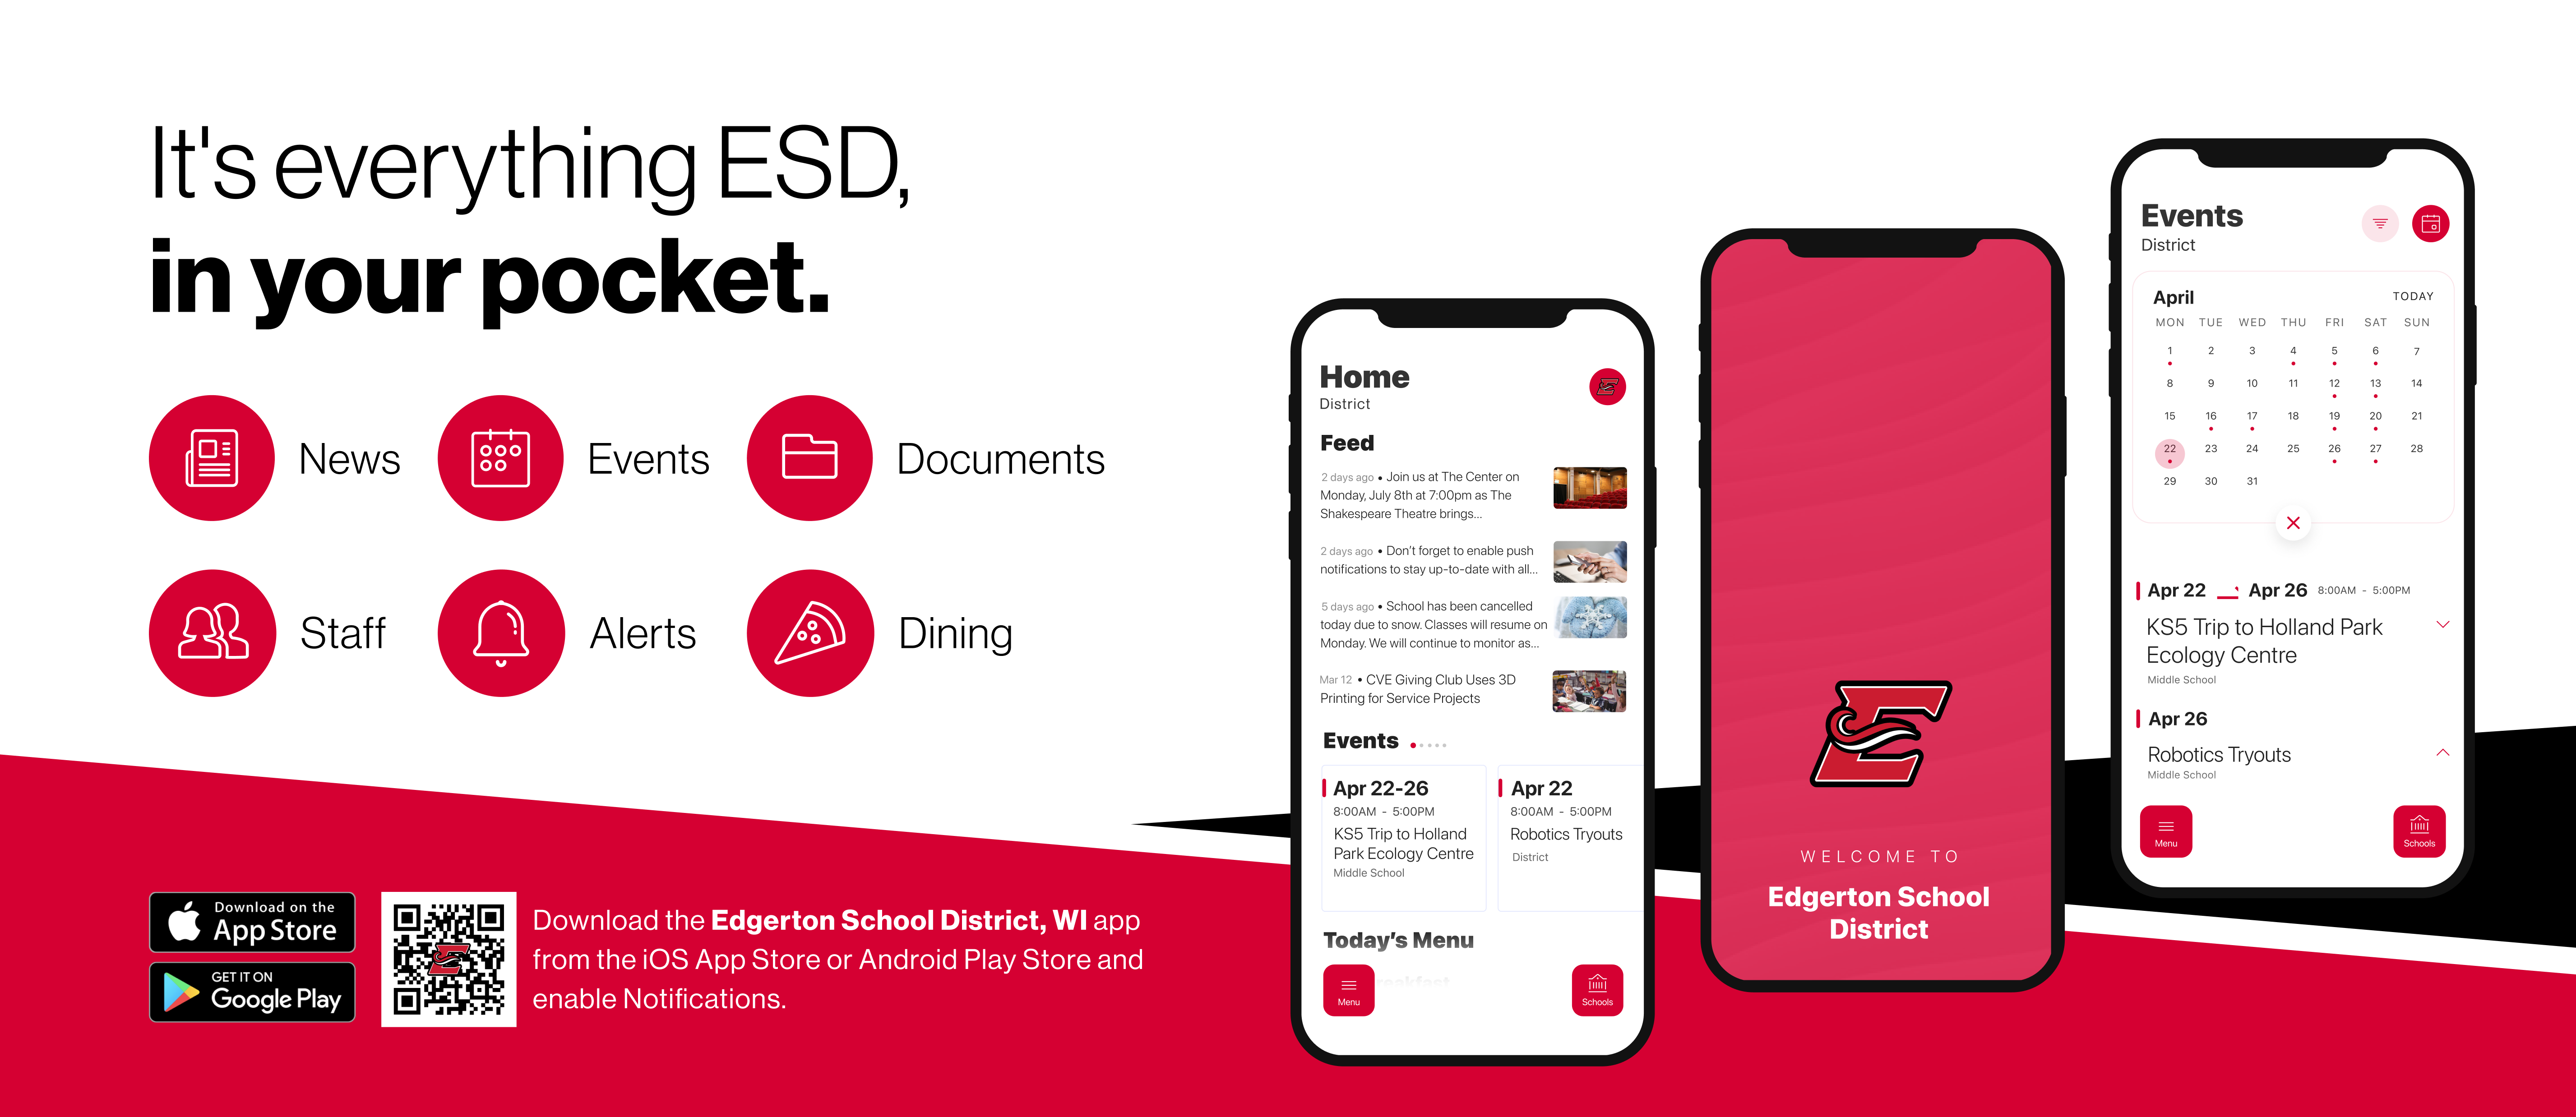 information about the new Edgerton School District app with a QR download code in the lower left and the caption "It's everything ESD, in your pocket."